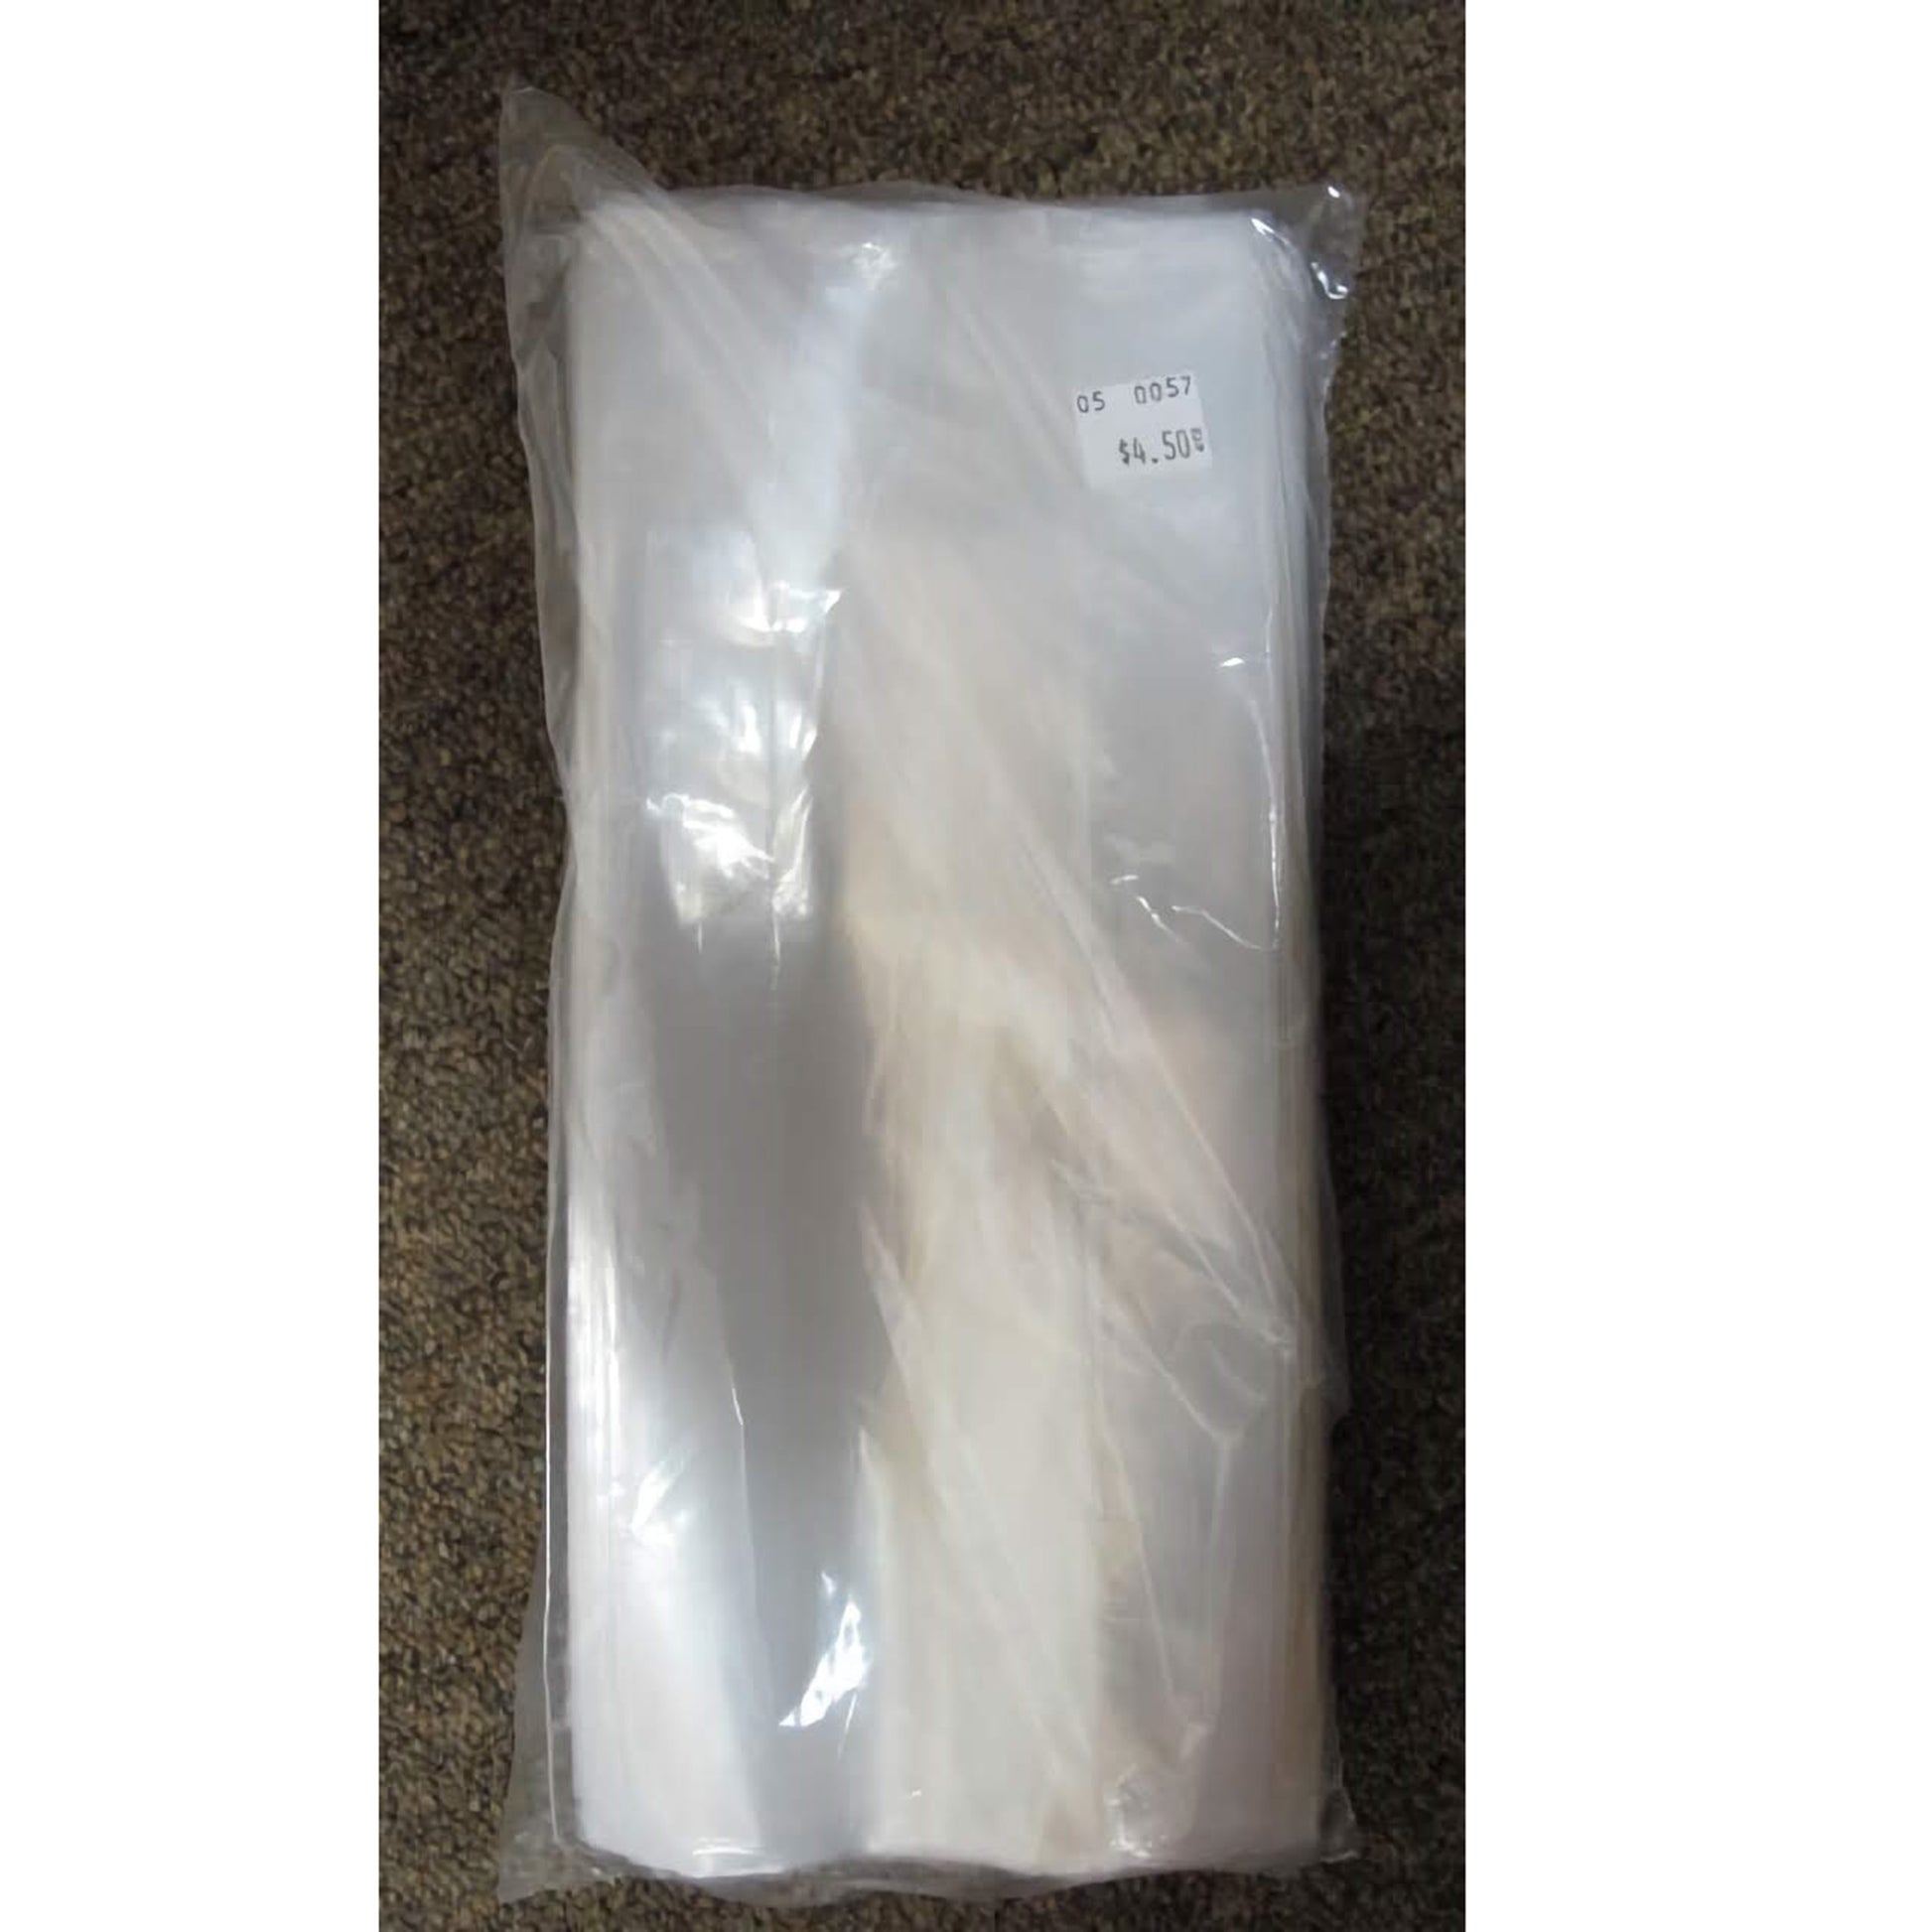 A sealed package of clear poly bags sized 4 x 10 inches. The poly bags are stacked within the package, and their transparency allows for the contents to be partially visible, showing the folded edges of the bags.